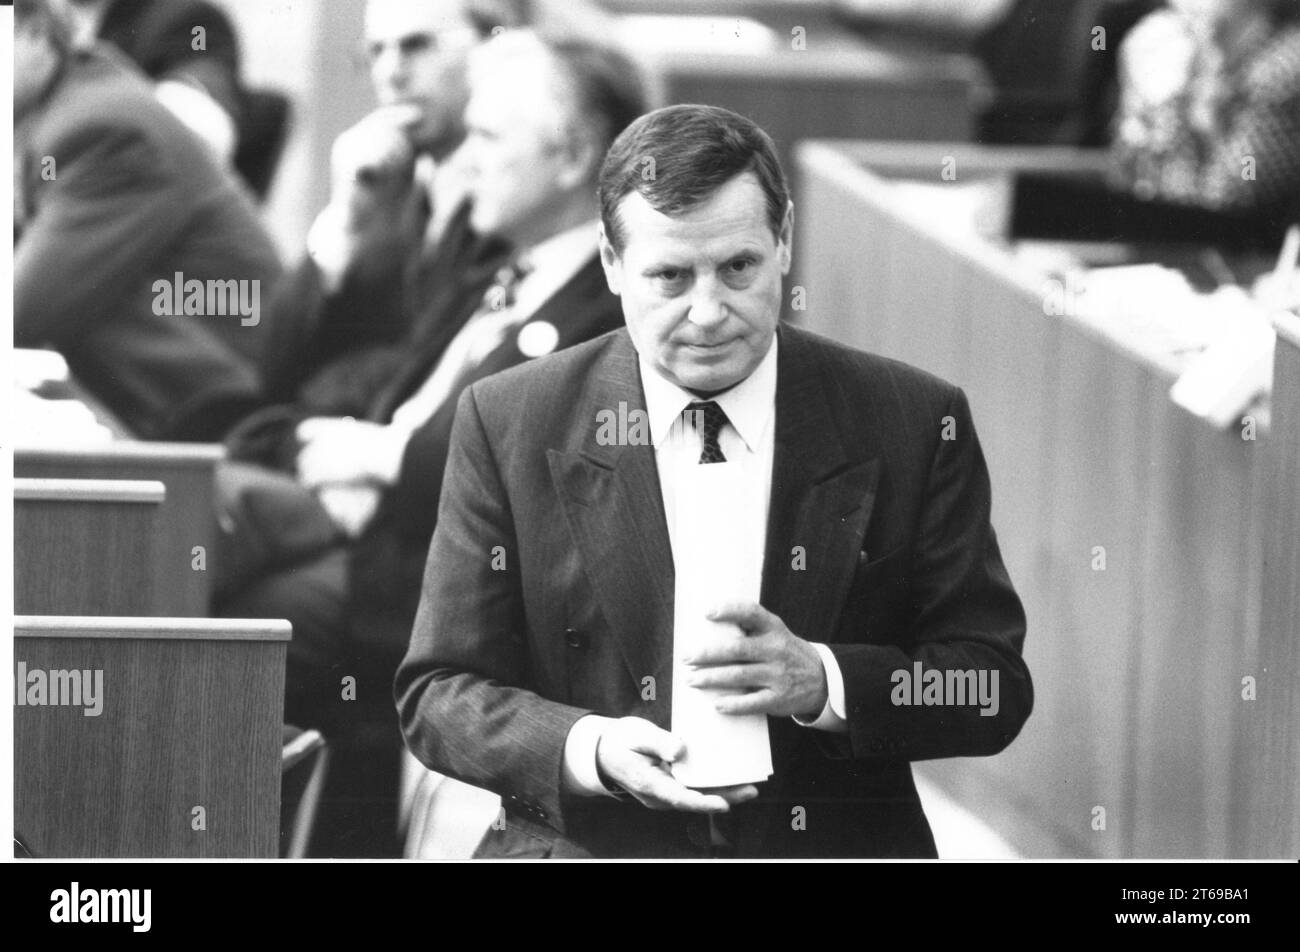 Chairman of the Stolpe Investigation Committee, Lothar Bisky (PDS) after the statement in which he justified the end of his work in the Stolpe Committee. Stasi. State Security. Landtag. DDR Aufarbeitung Wende Photo: MAZ/Michael Hübner, 24.03.1994 [automated translation] Stock Photo